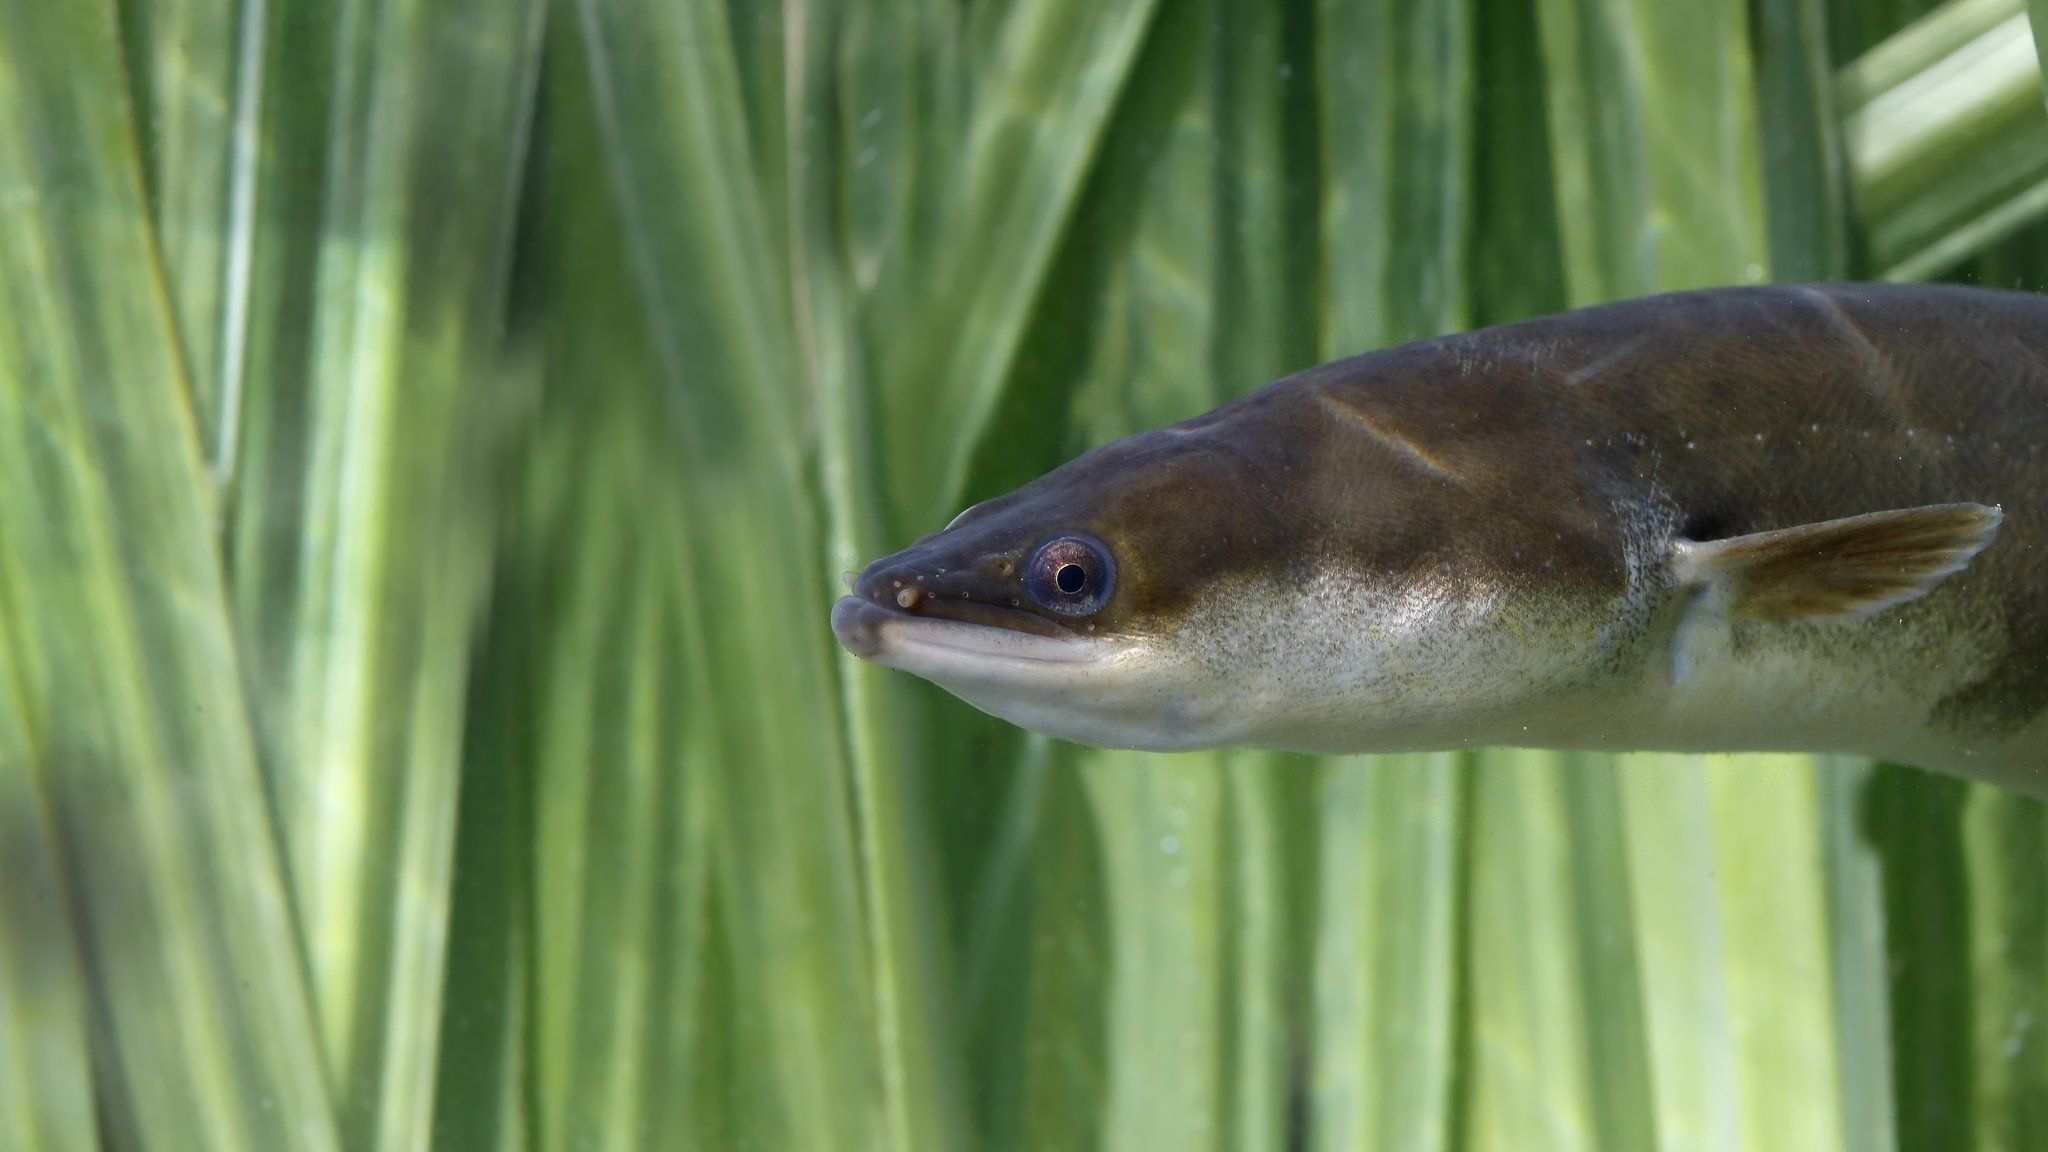 The European eel is classed as critically endangered